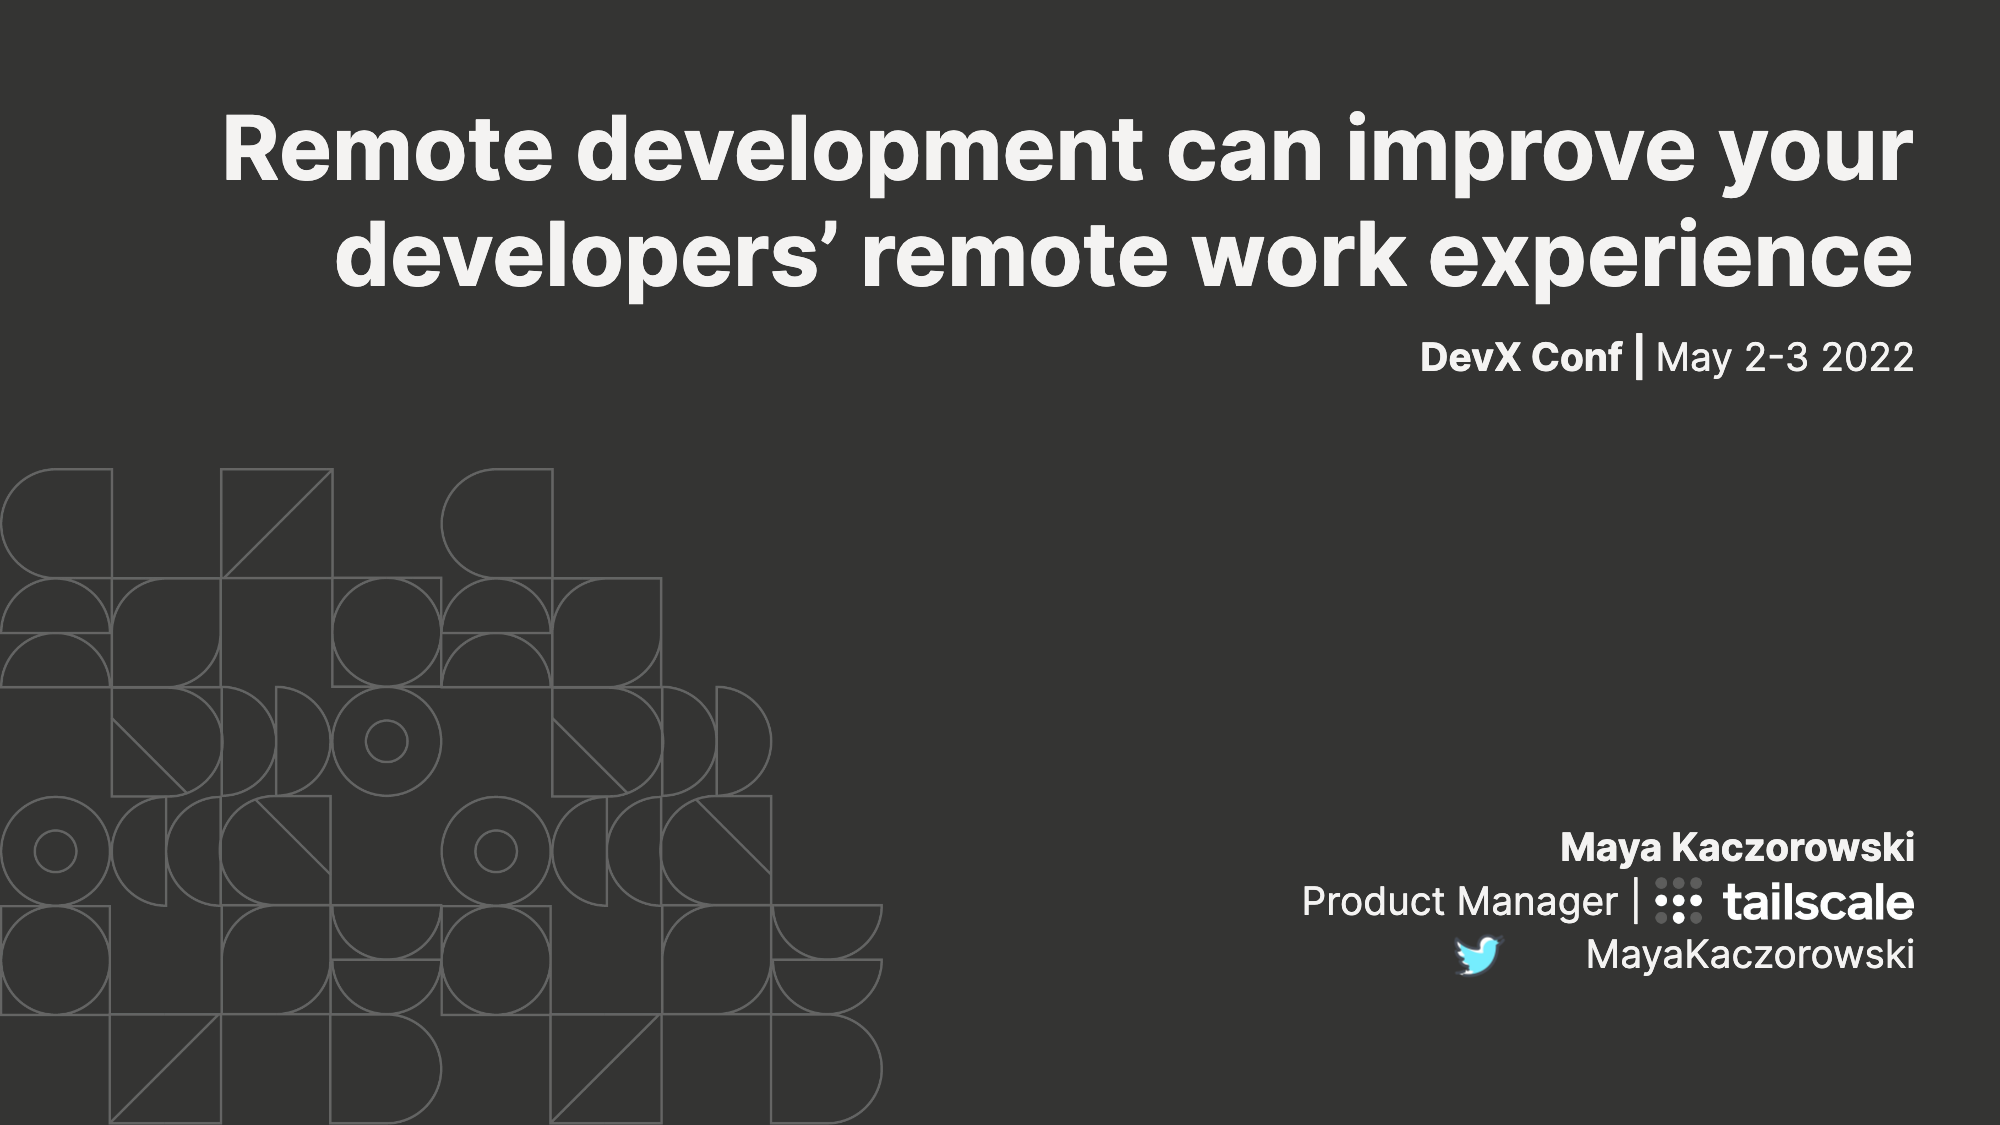 DevX Conf 2022 | Remote development can improve your developers remote work experience